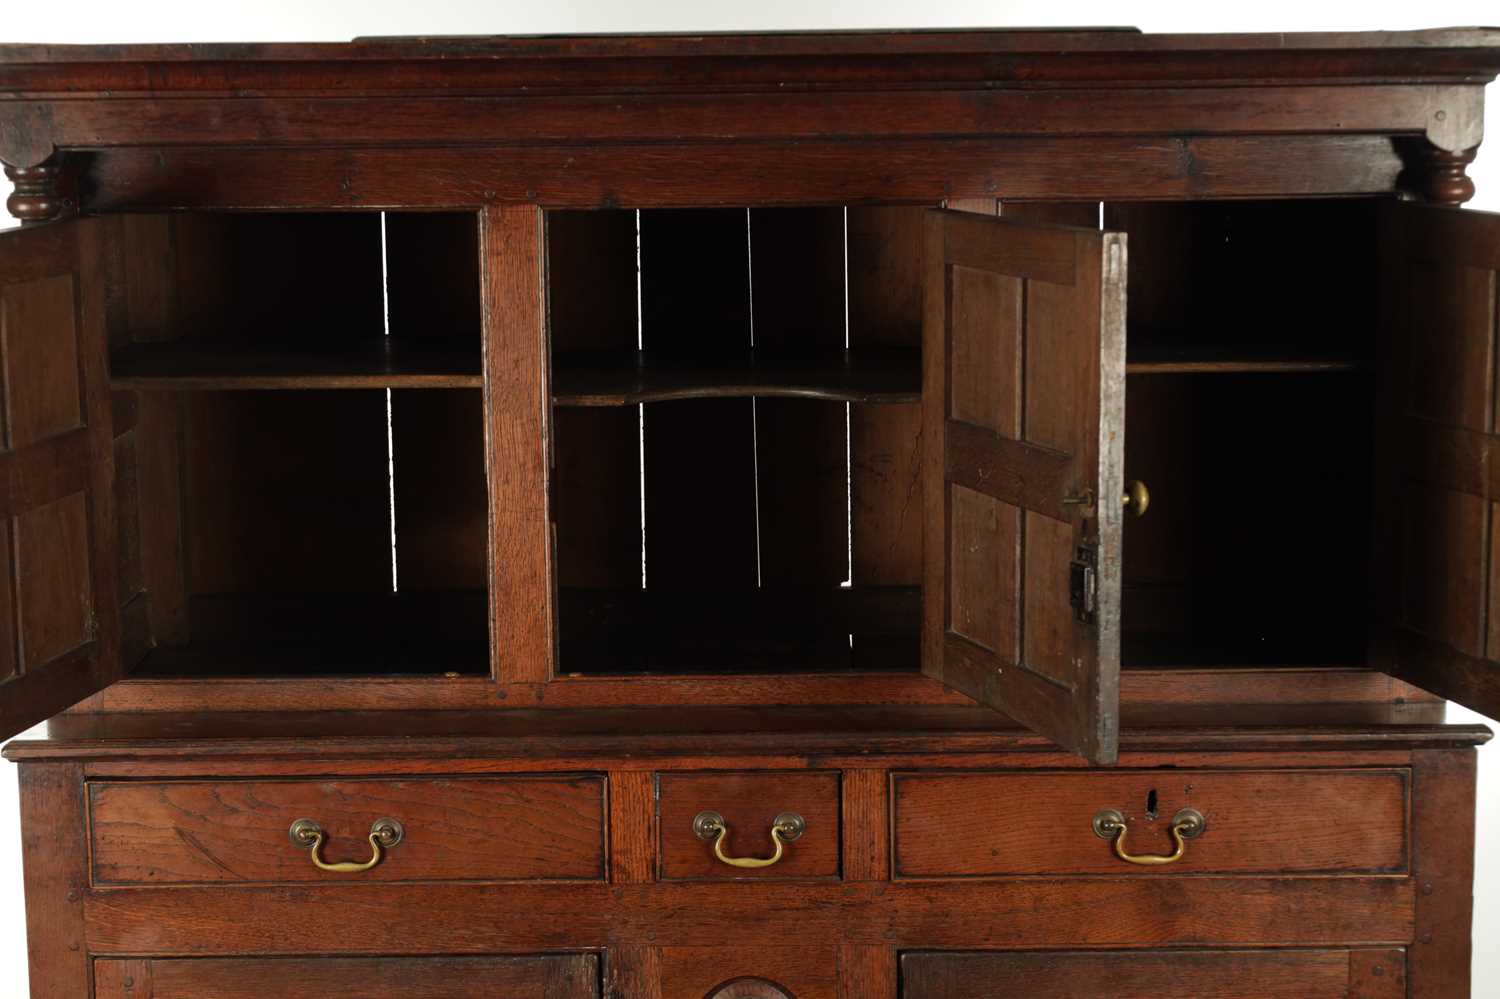 AN EARLY 18TH CENTURY PANELLED OAK DUDARN - Image 6 of 8